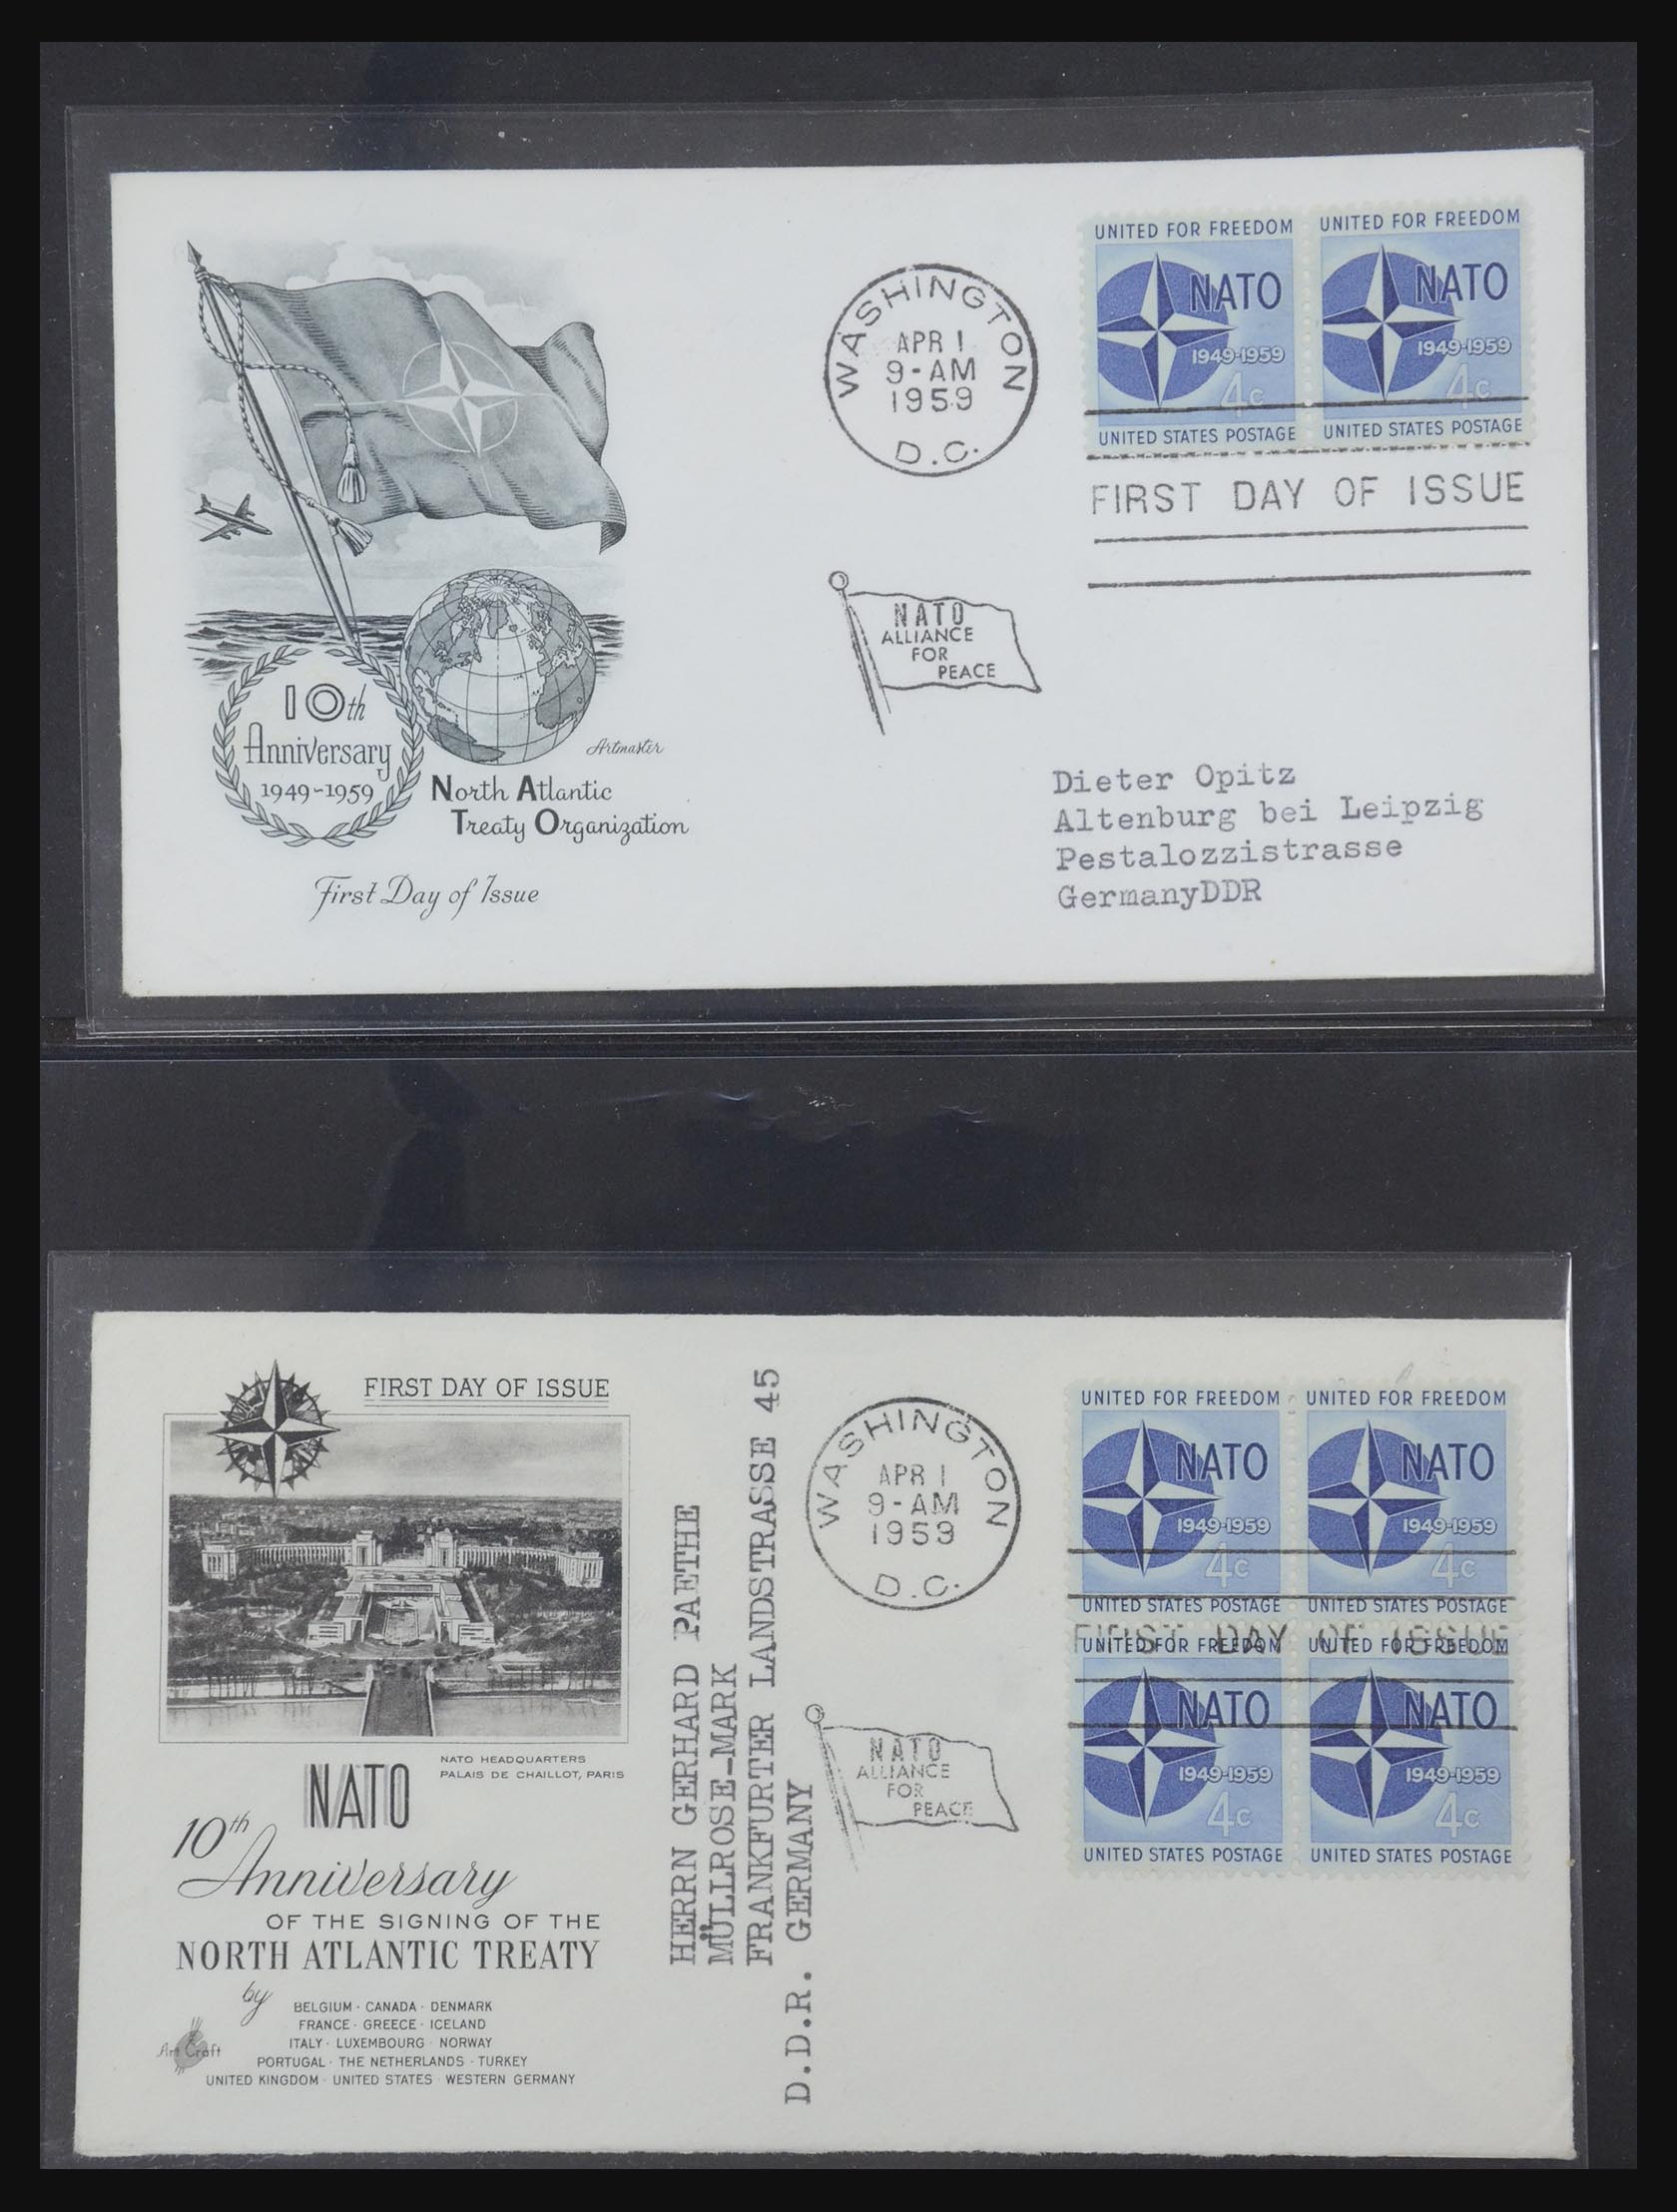 31913 0007 - 31913 USA first day cover collection 1945-1990.